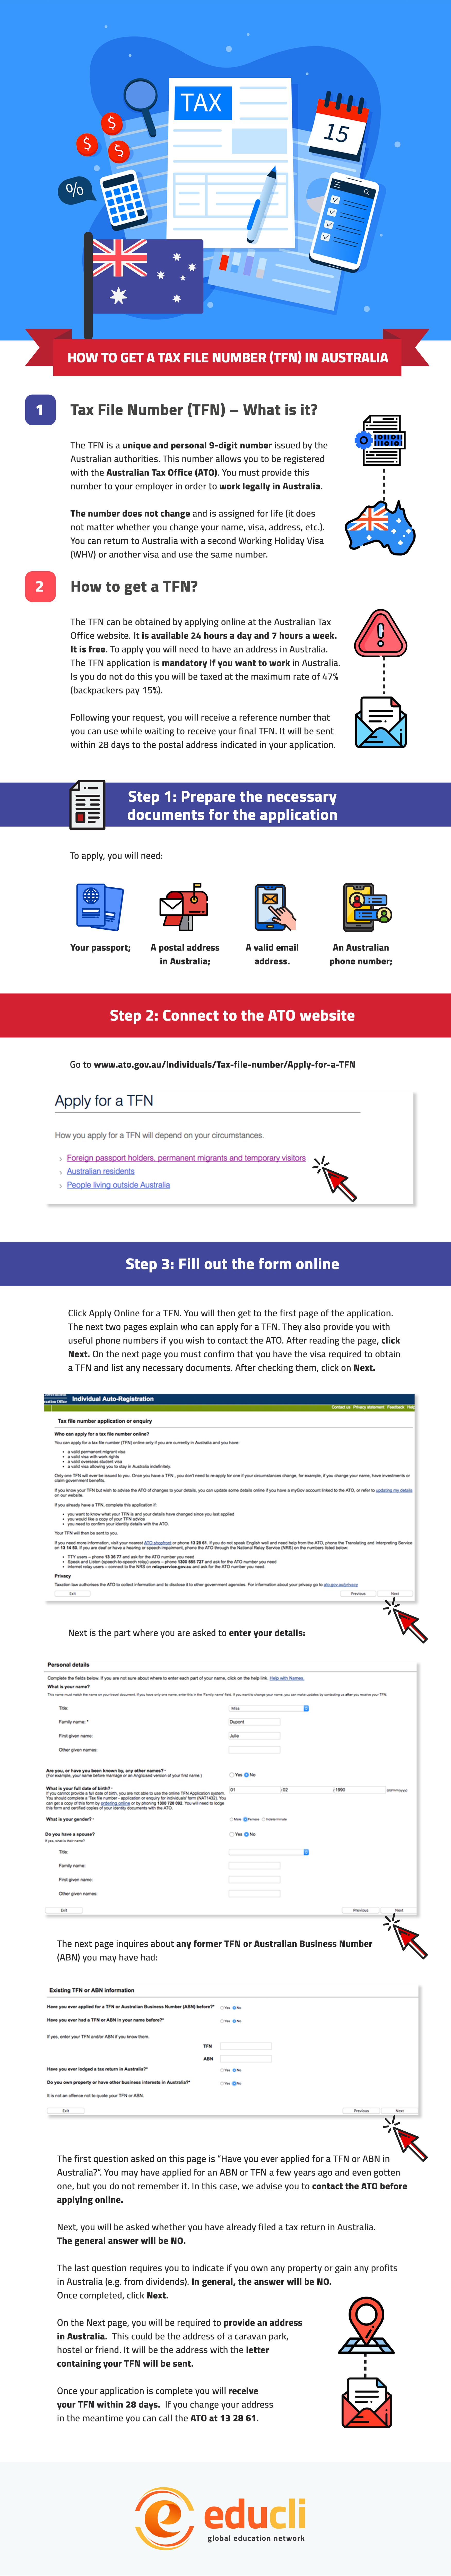 HOW TO GET A TAX FILE NUMBER (TFN) IN AUSTRALIA